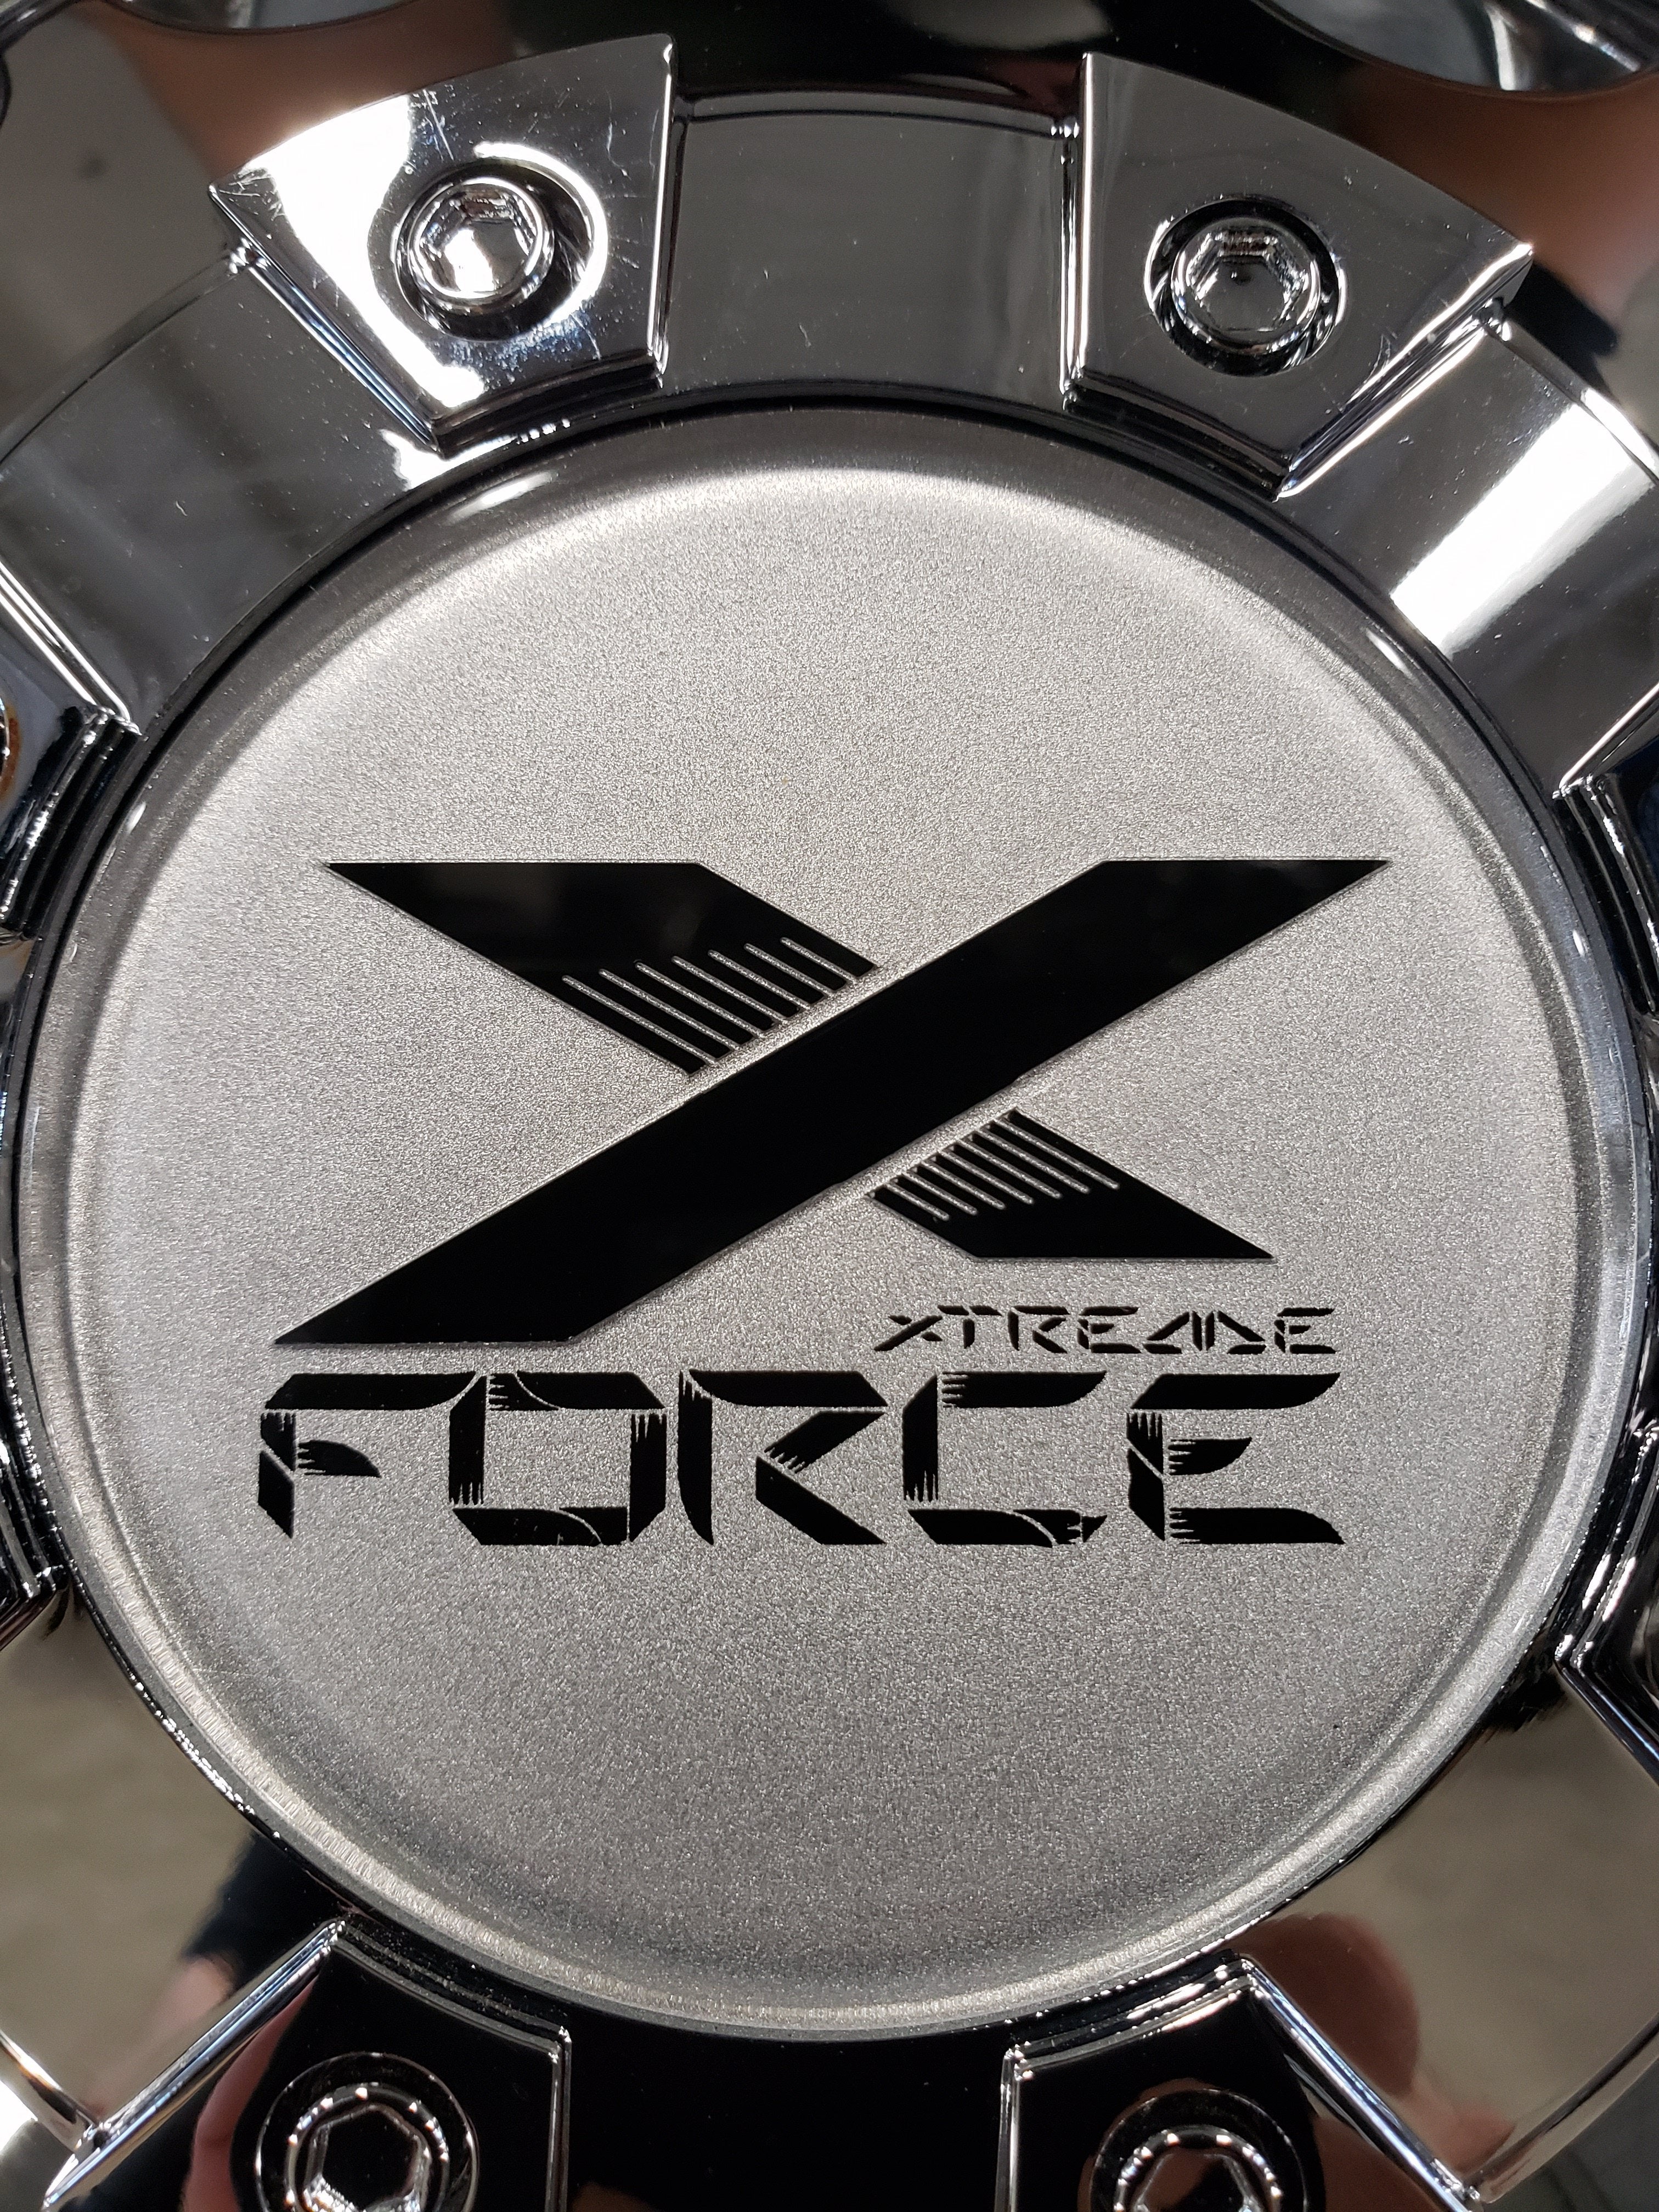 Xtreme Force Center Cap Logo Sticker - Tires and Engine Performance